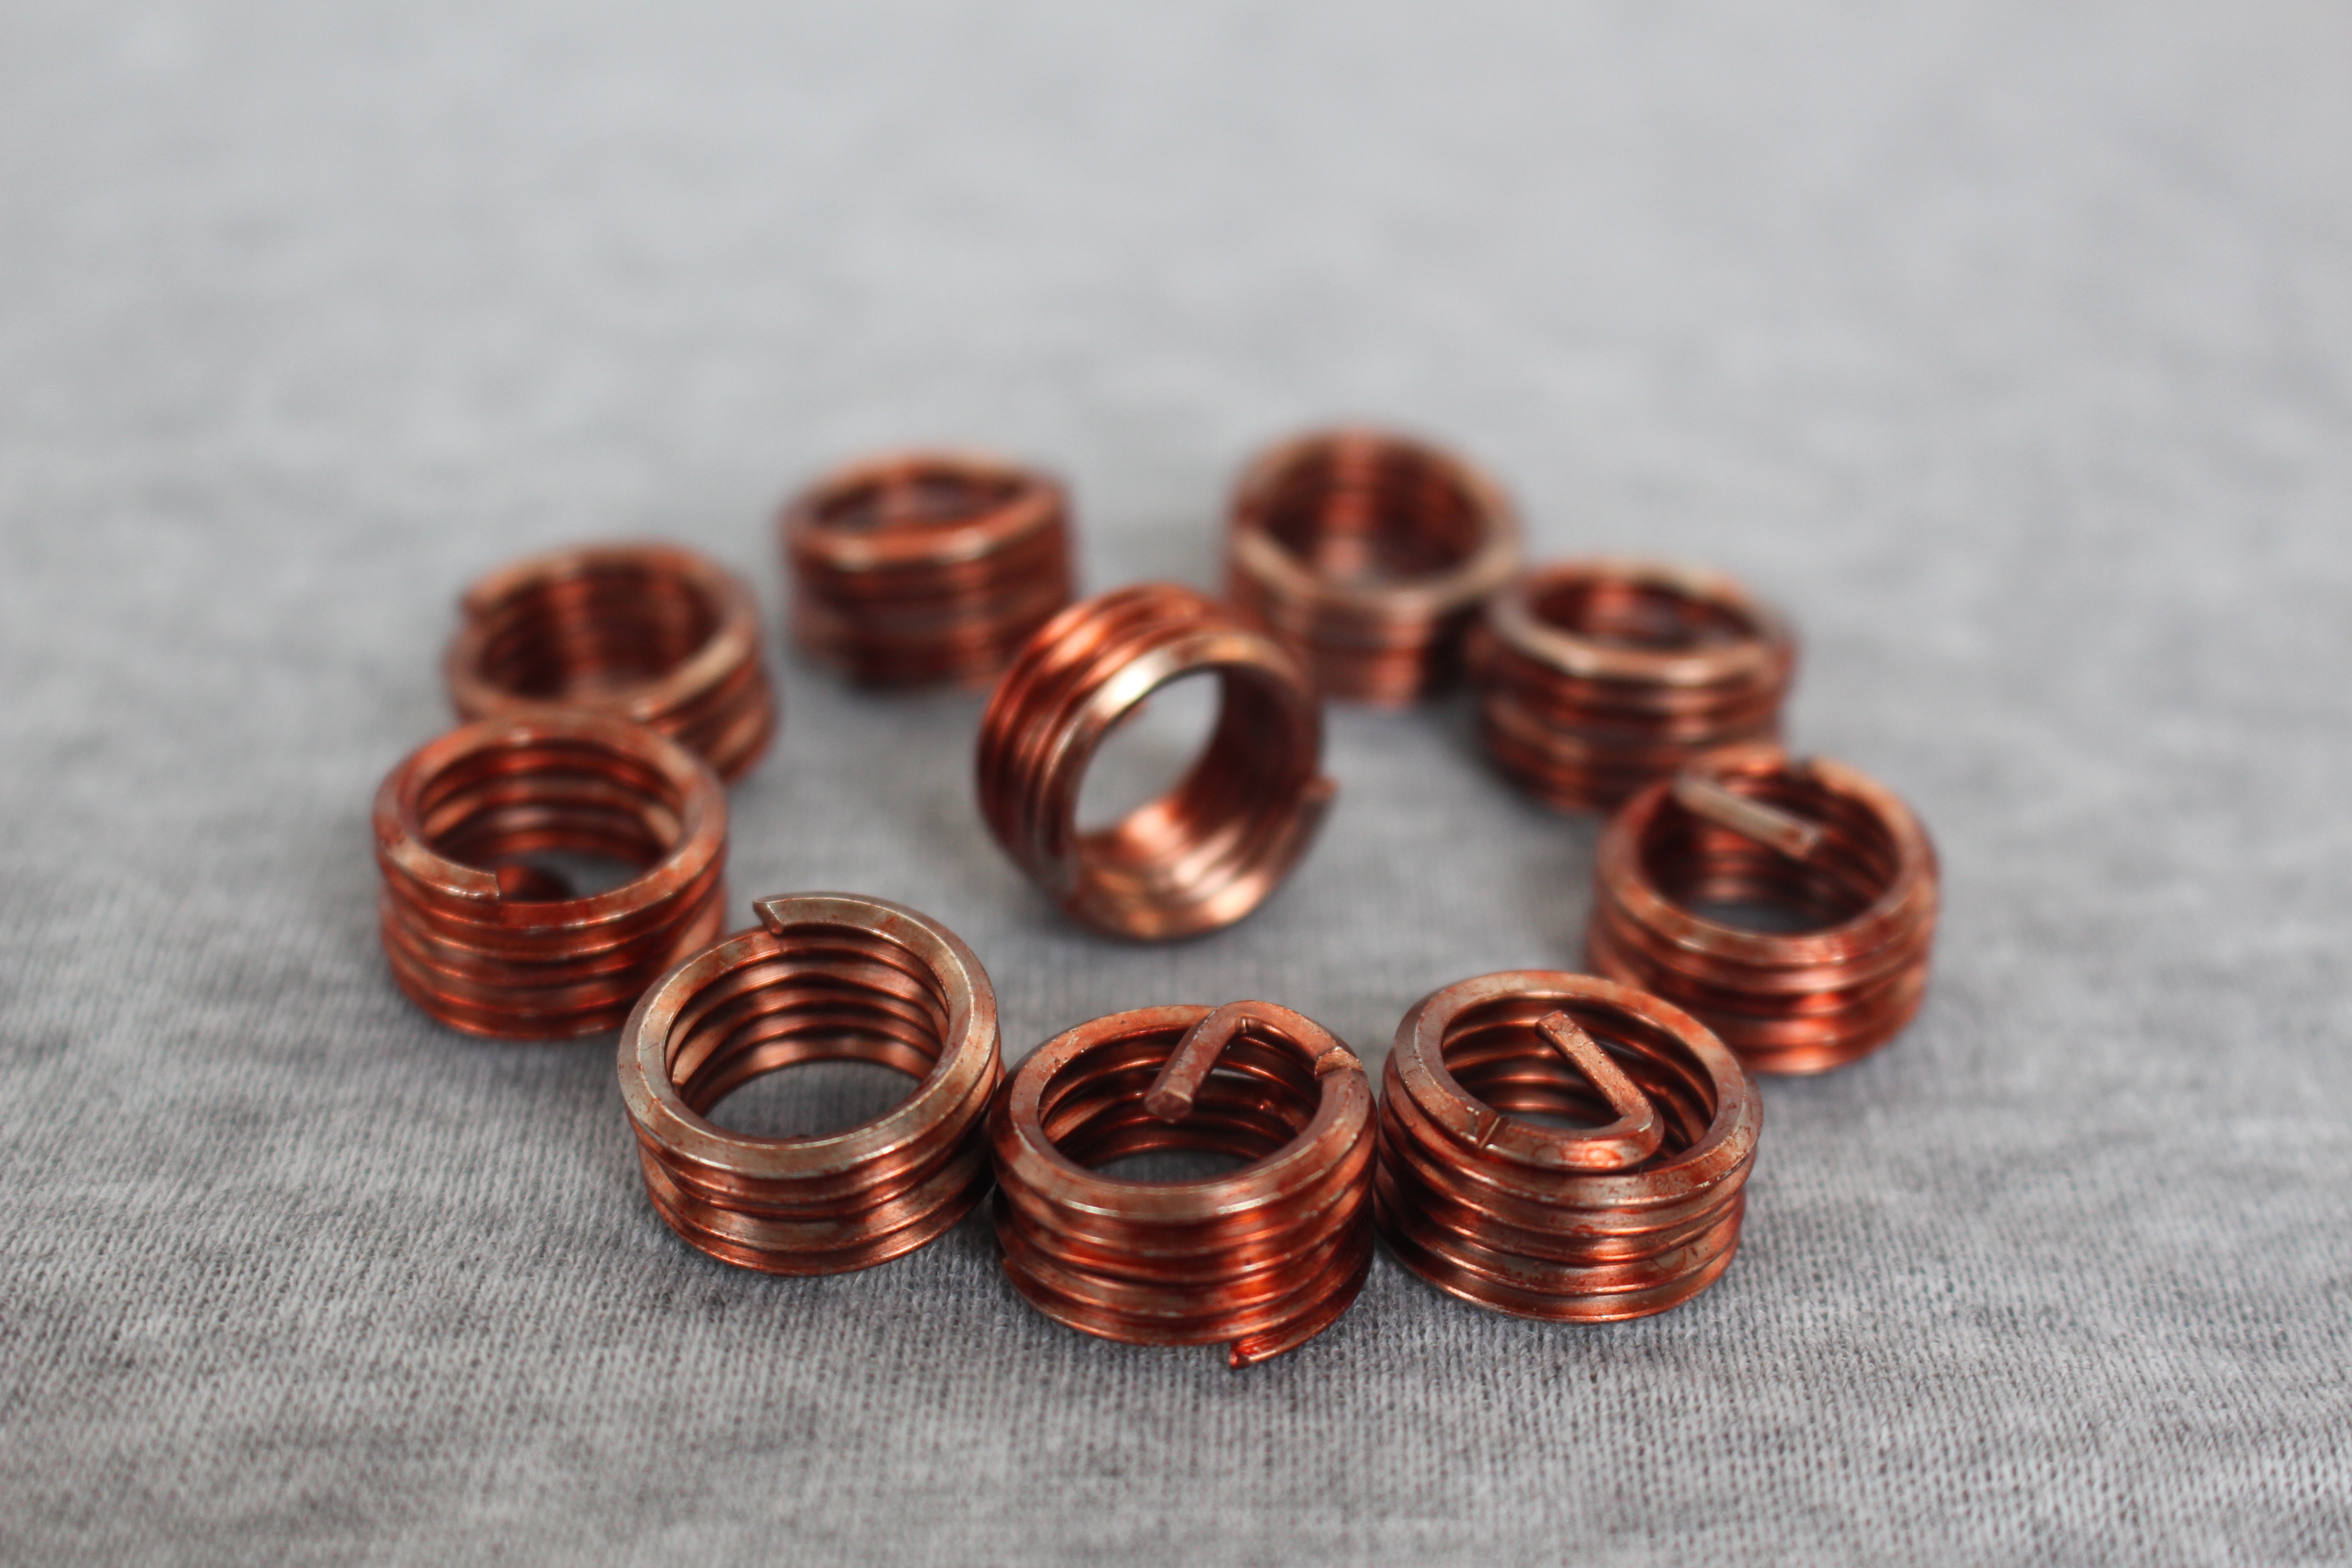 Threaded Inserts for Metal